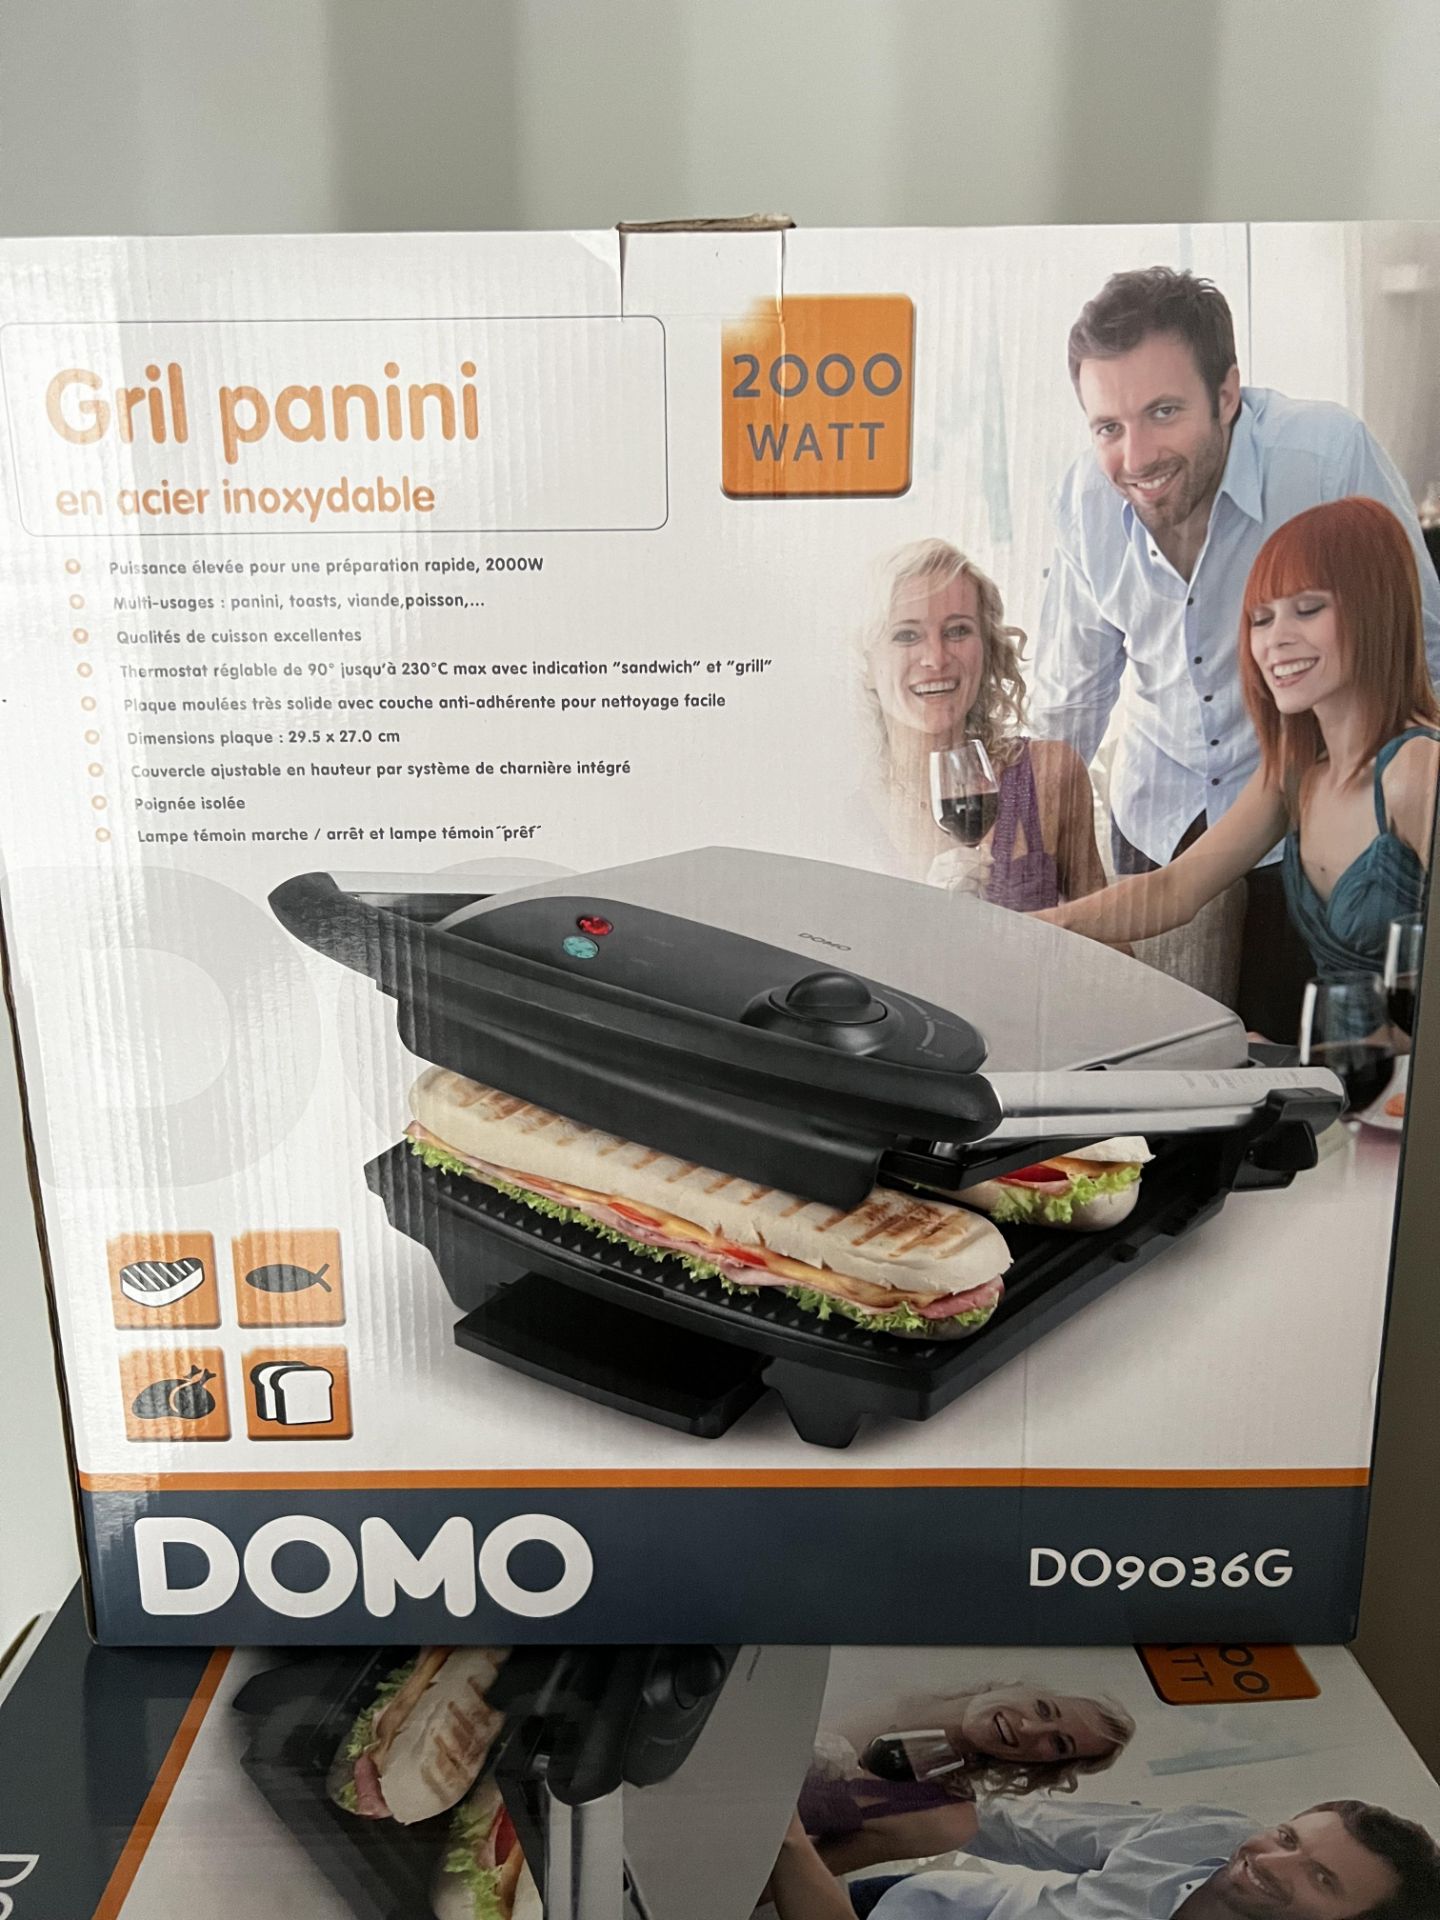 10 x DOMO Twin Sandwich toasters Pannini makers 700W RRP £ 50 total £ 500